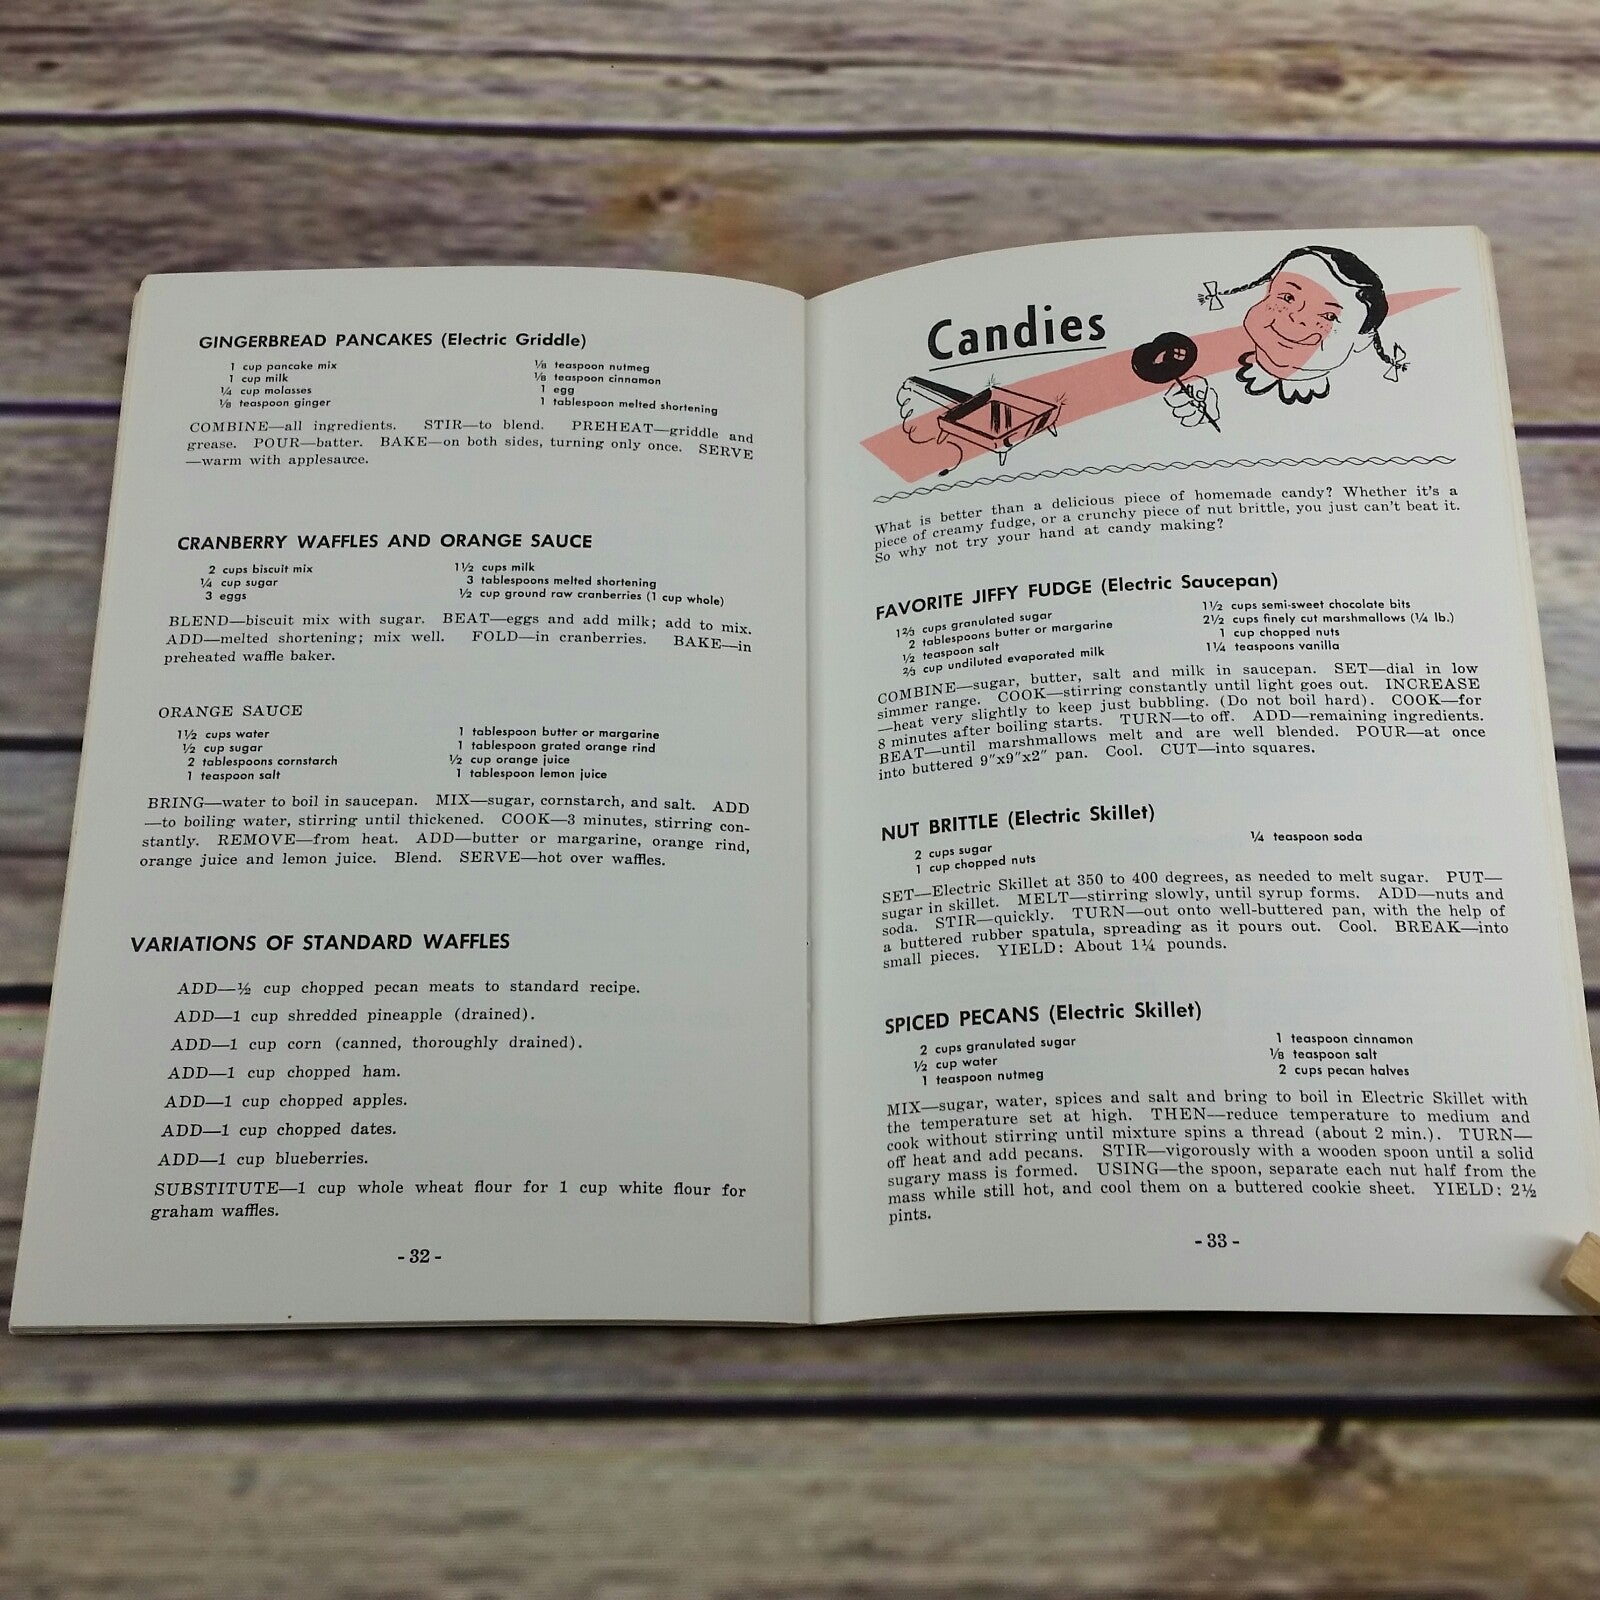 Vintage Cookbook Around the World Cookery with Electric Housewares Recipes 1958 Southern California Edison Company Promo Paperback Booklet - At Grandma's Table